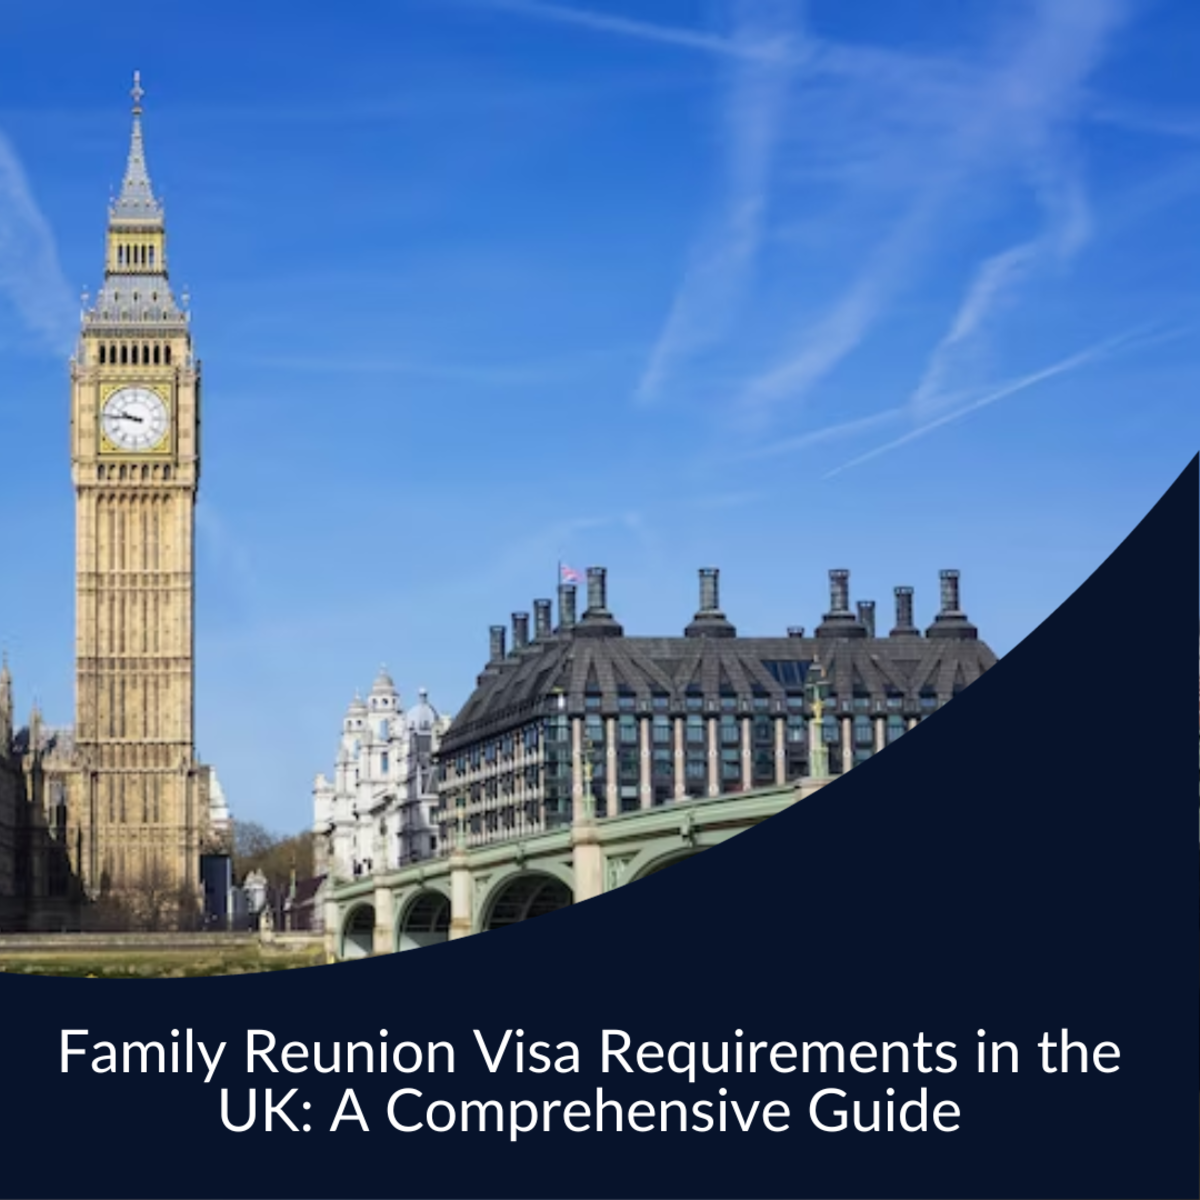 Family Reunion Visa Requirements in the UK: A Comprehensive Guide